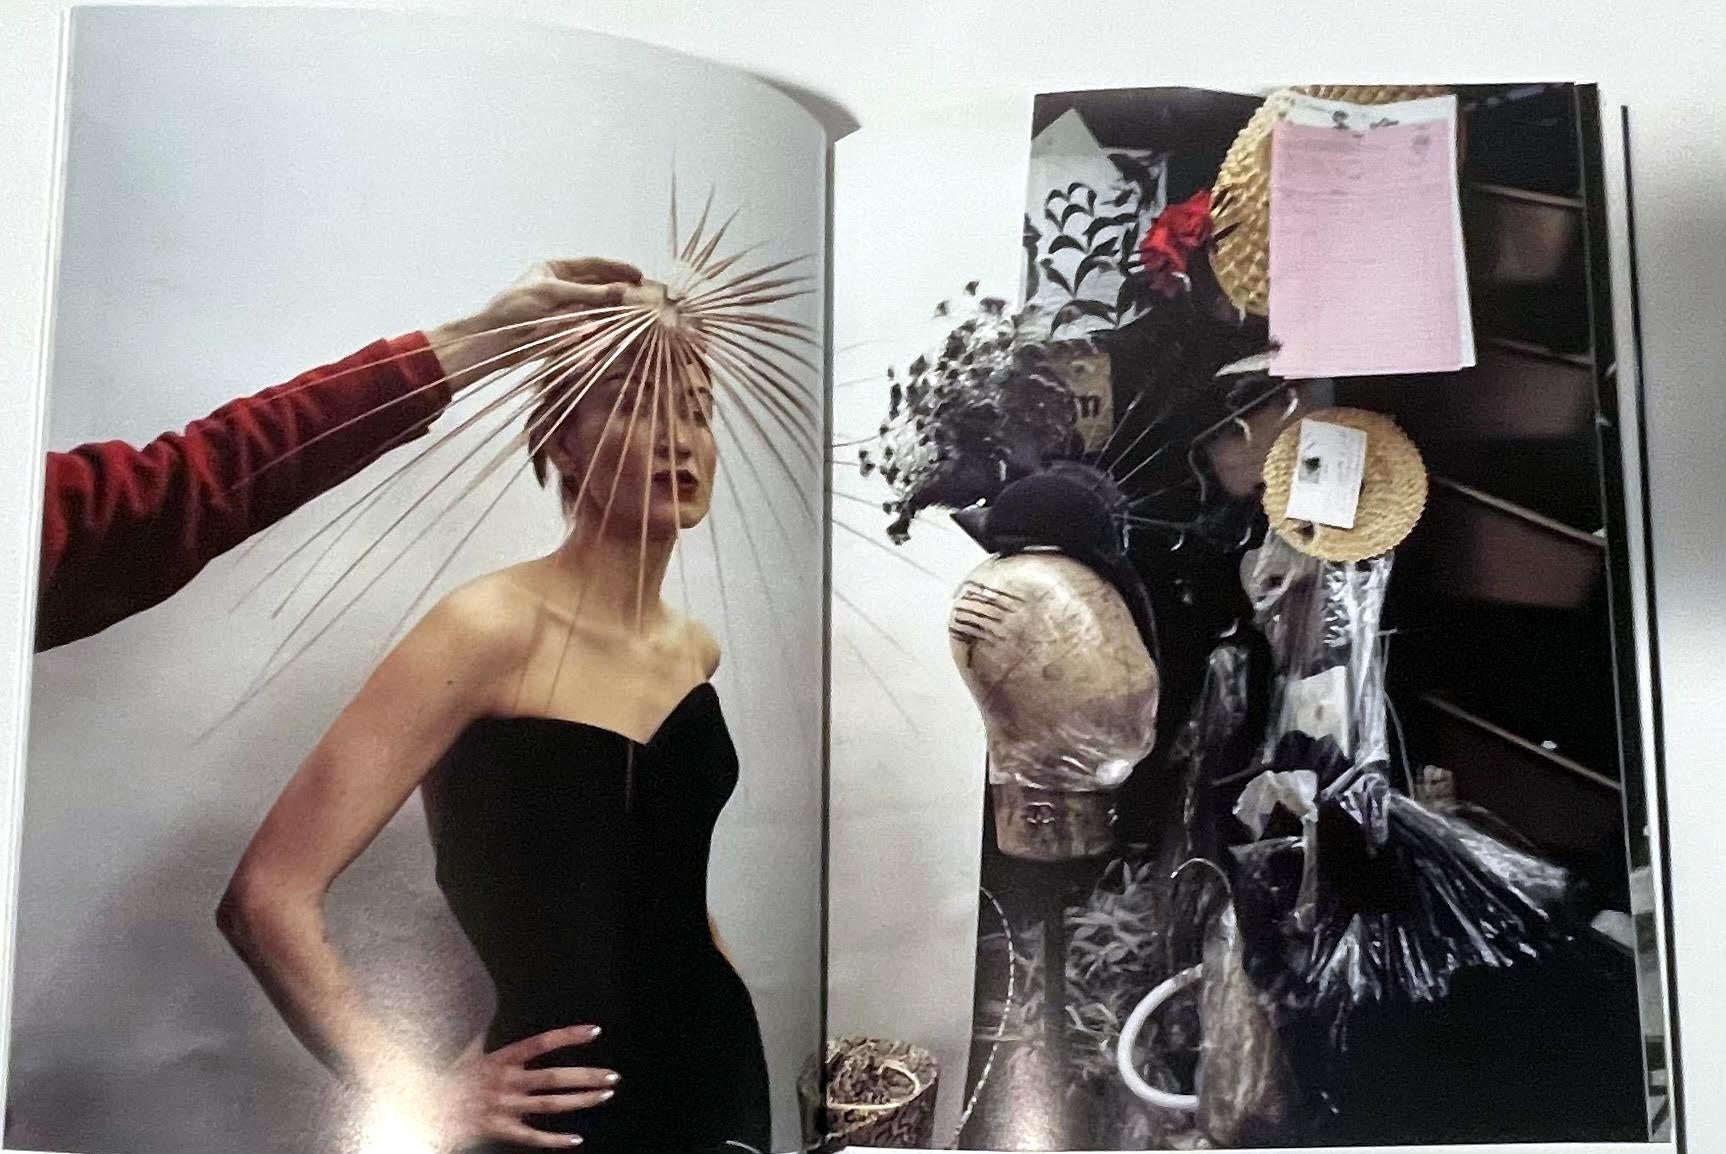 Philip Treacy hardback book, hand signed by Philip Treacy, milliner to the stars For Sale 2